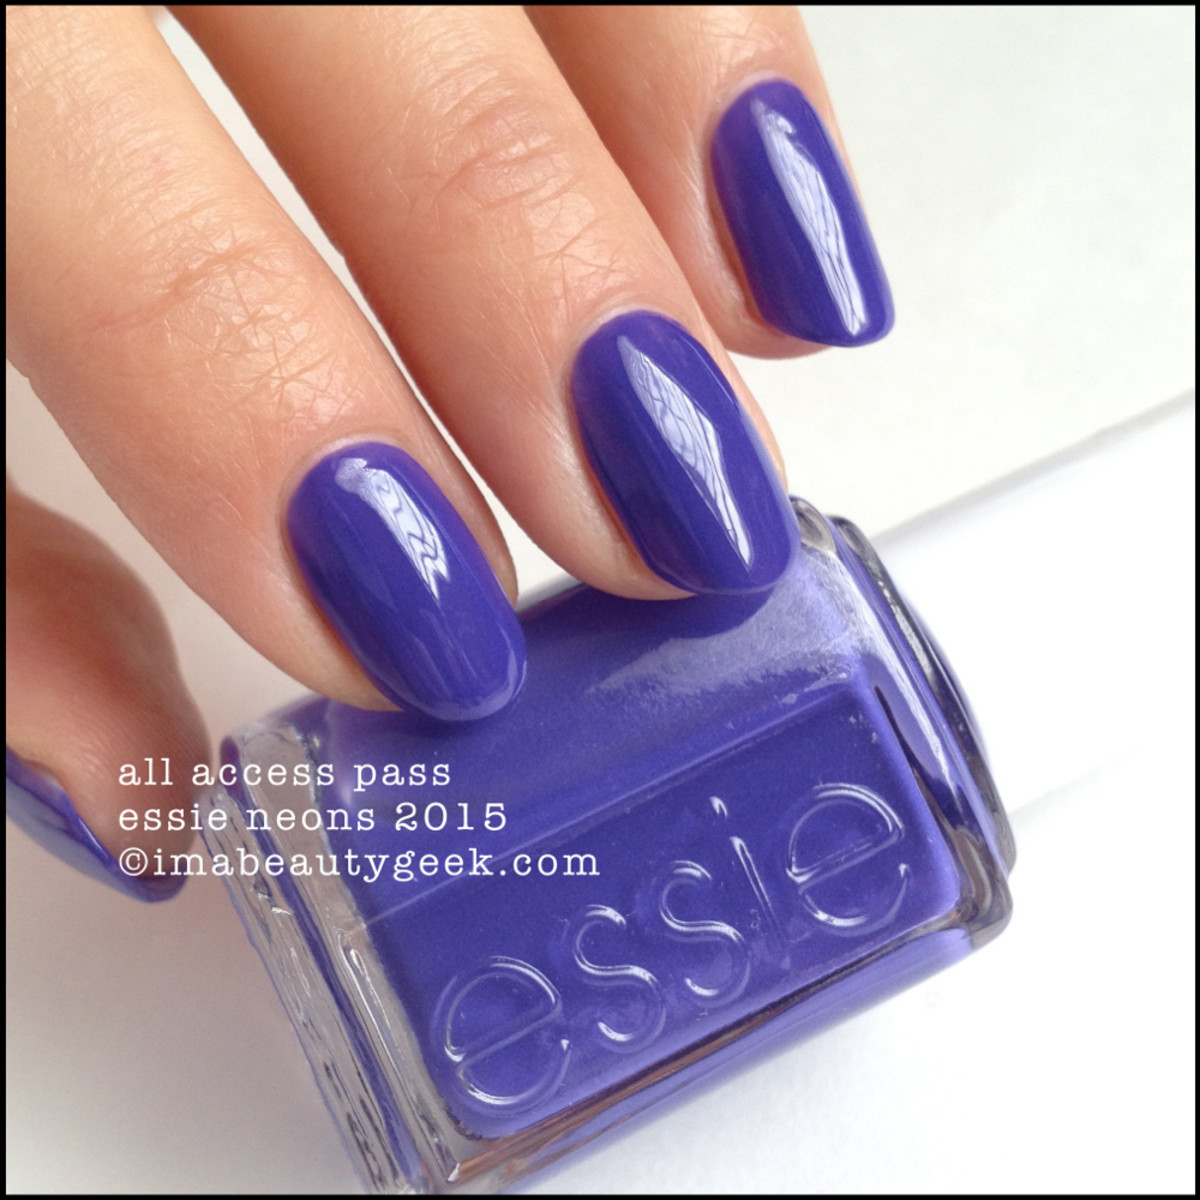 Essie Neons 2015 Collection All Access Pass Swatch